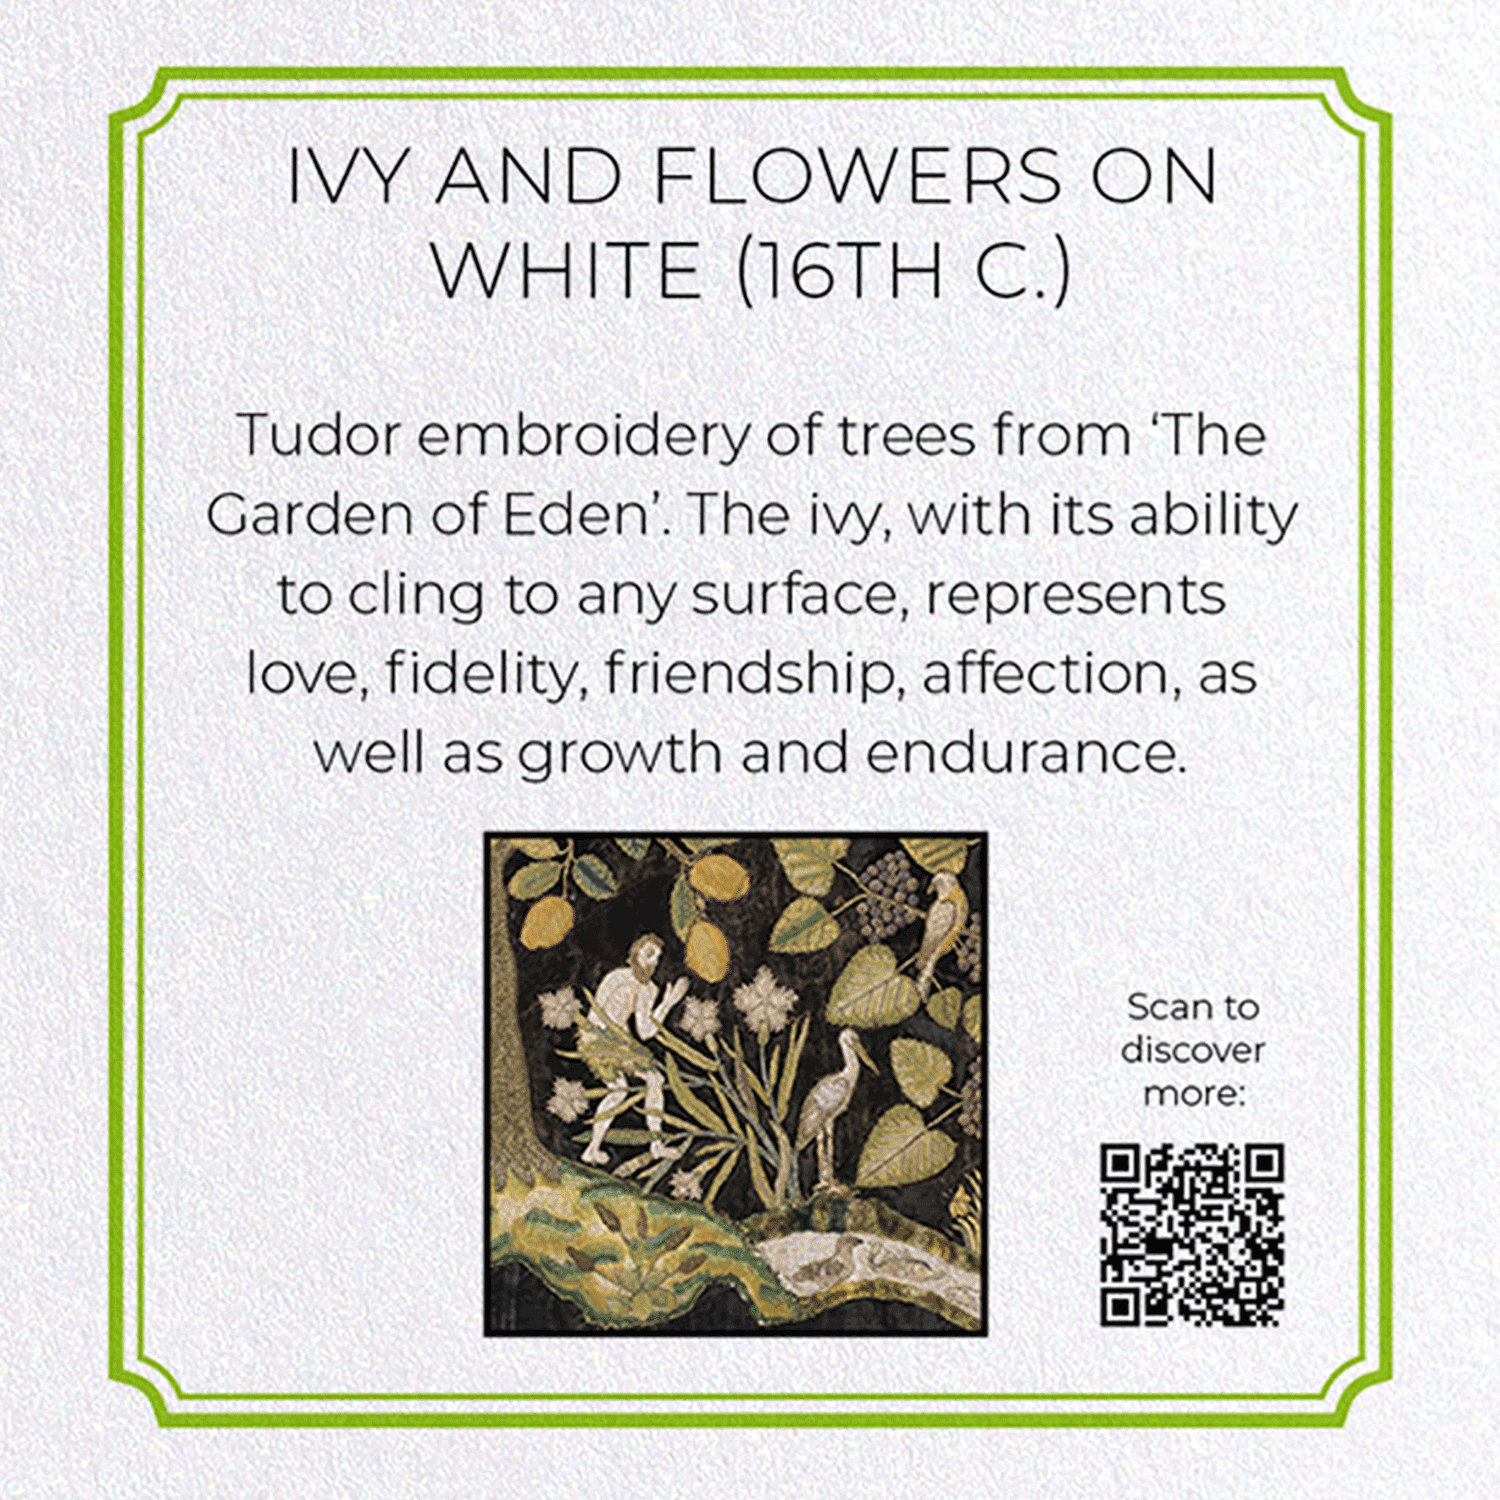 IVY AND FLOWERS ON WHITE (16TH C.)